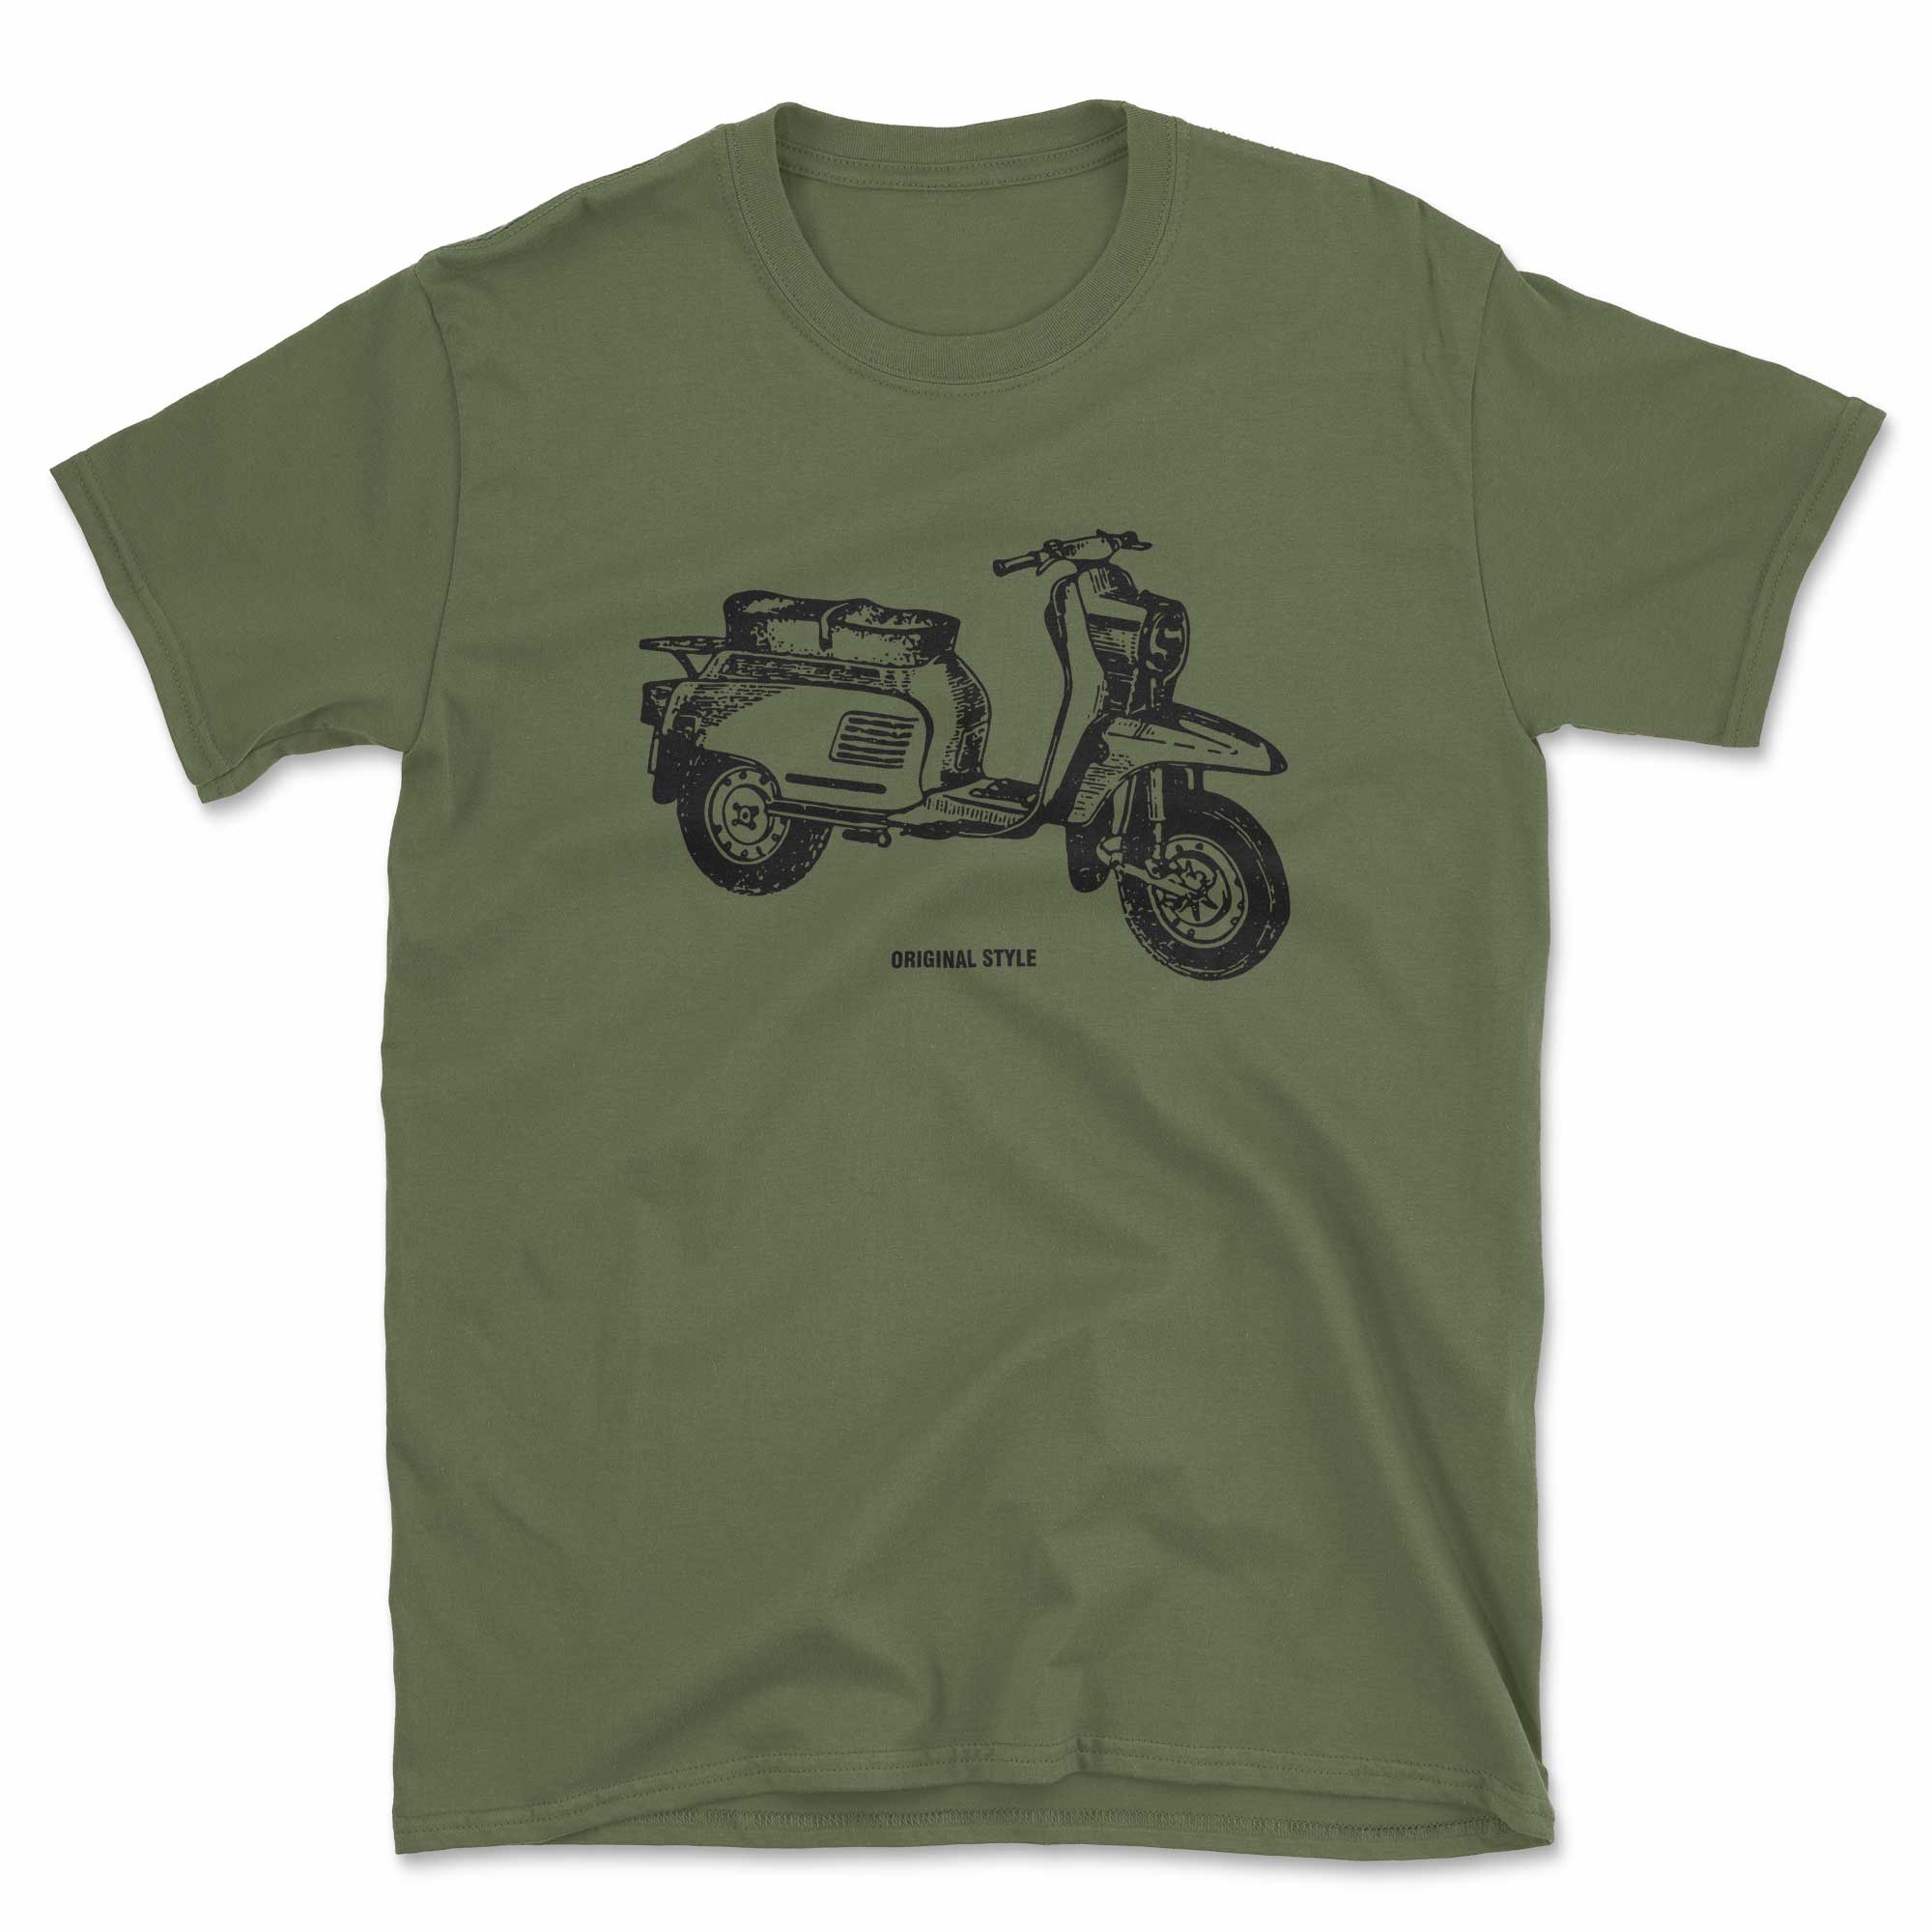 Original Style Scooter T-Shirt